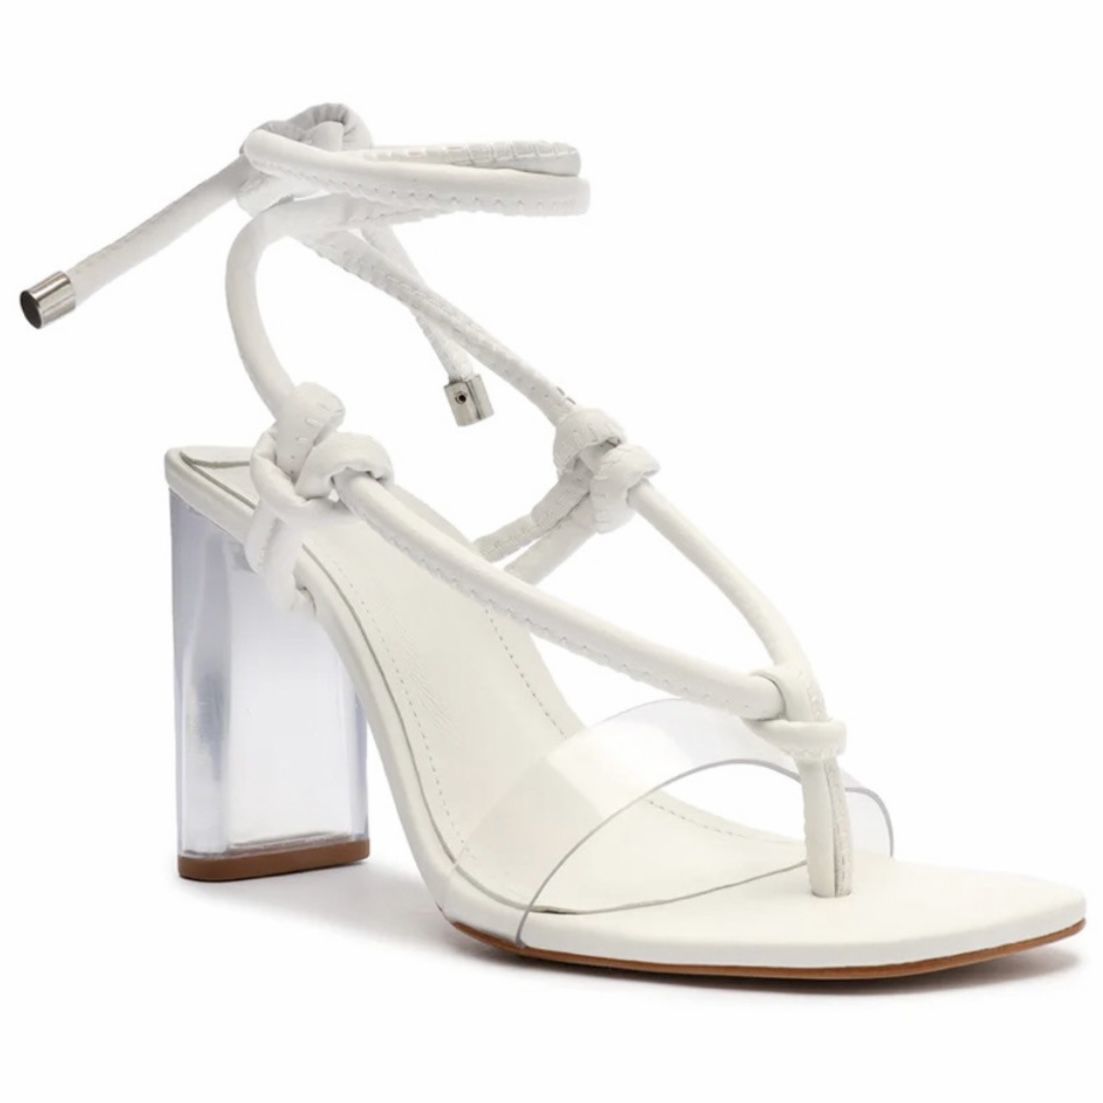 Schutz Siena white clear vamp lace-up open toe clear column heel sandals Size 9B